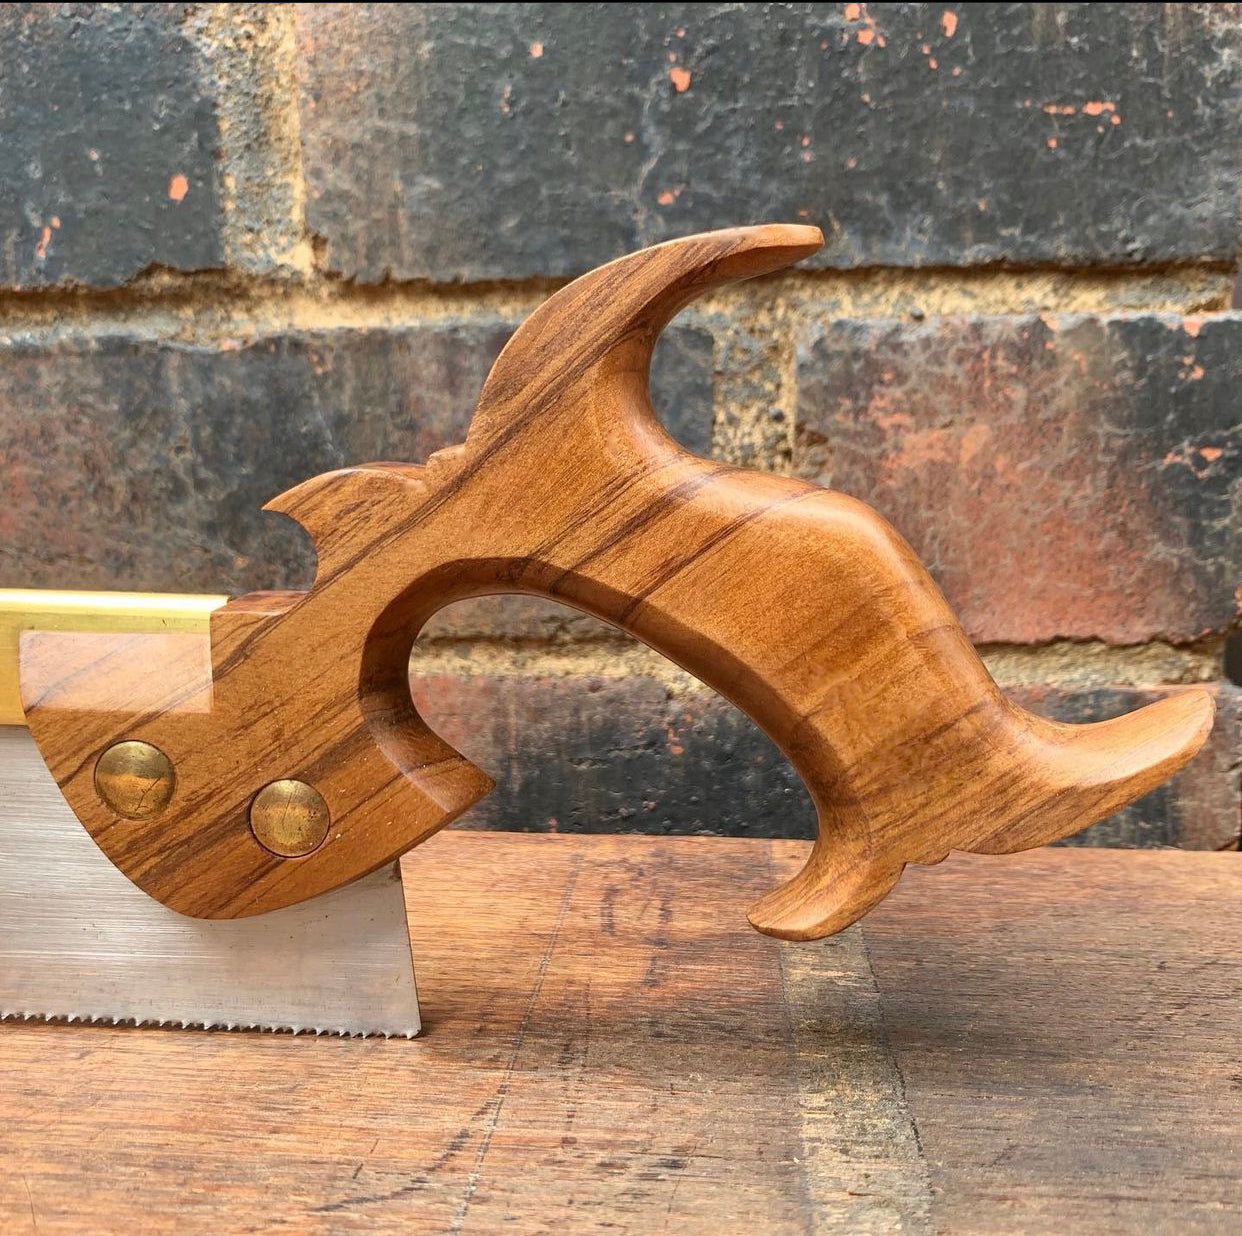 Heritage Saw saws Melbourne Australia bespoke hand made Australian tool dovetail carcass tenon timber timbers wood mortise Gigee